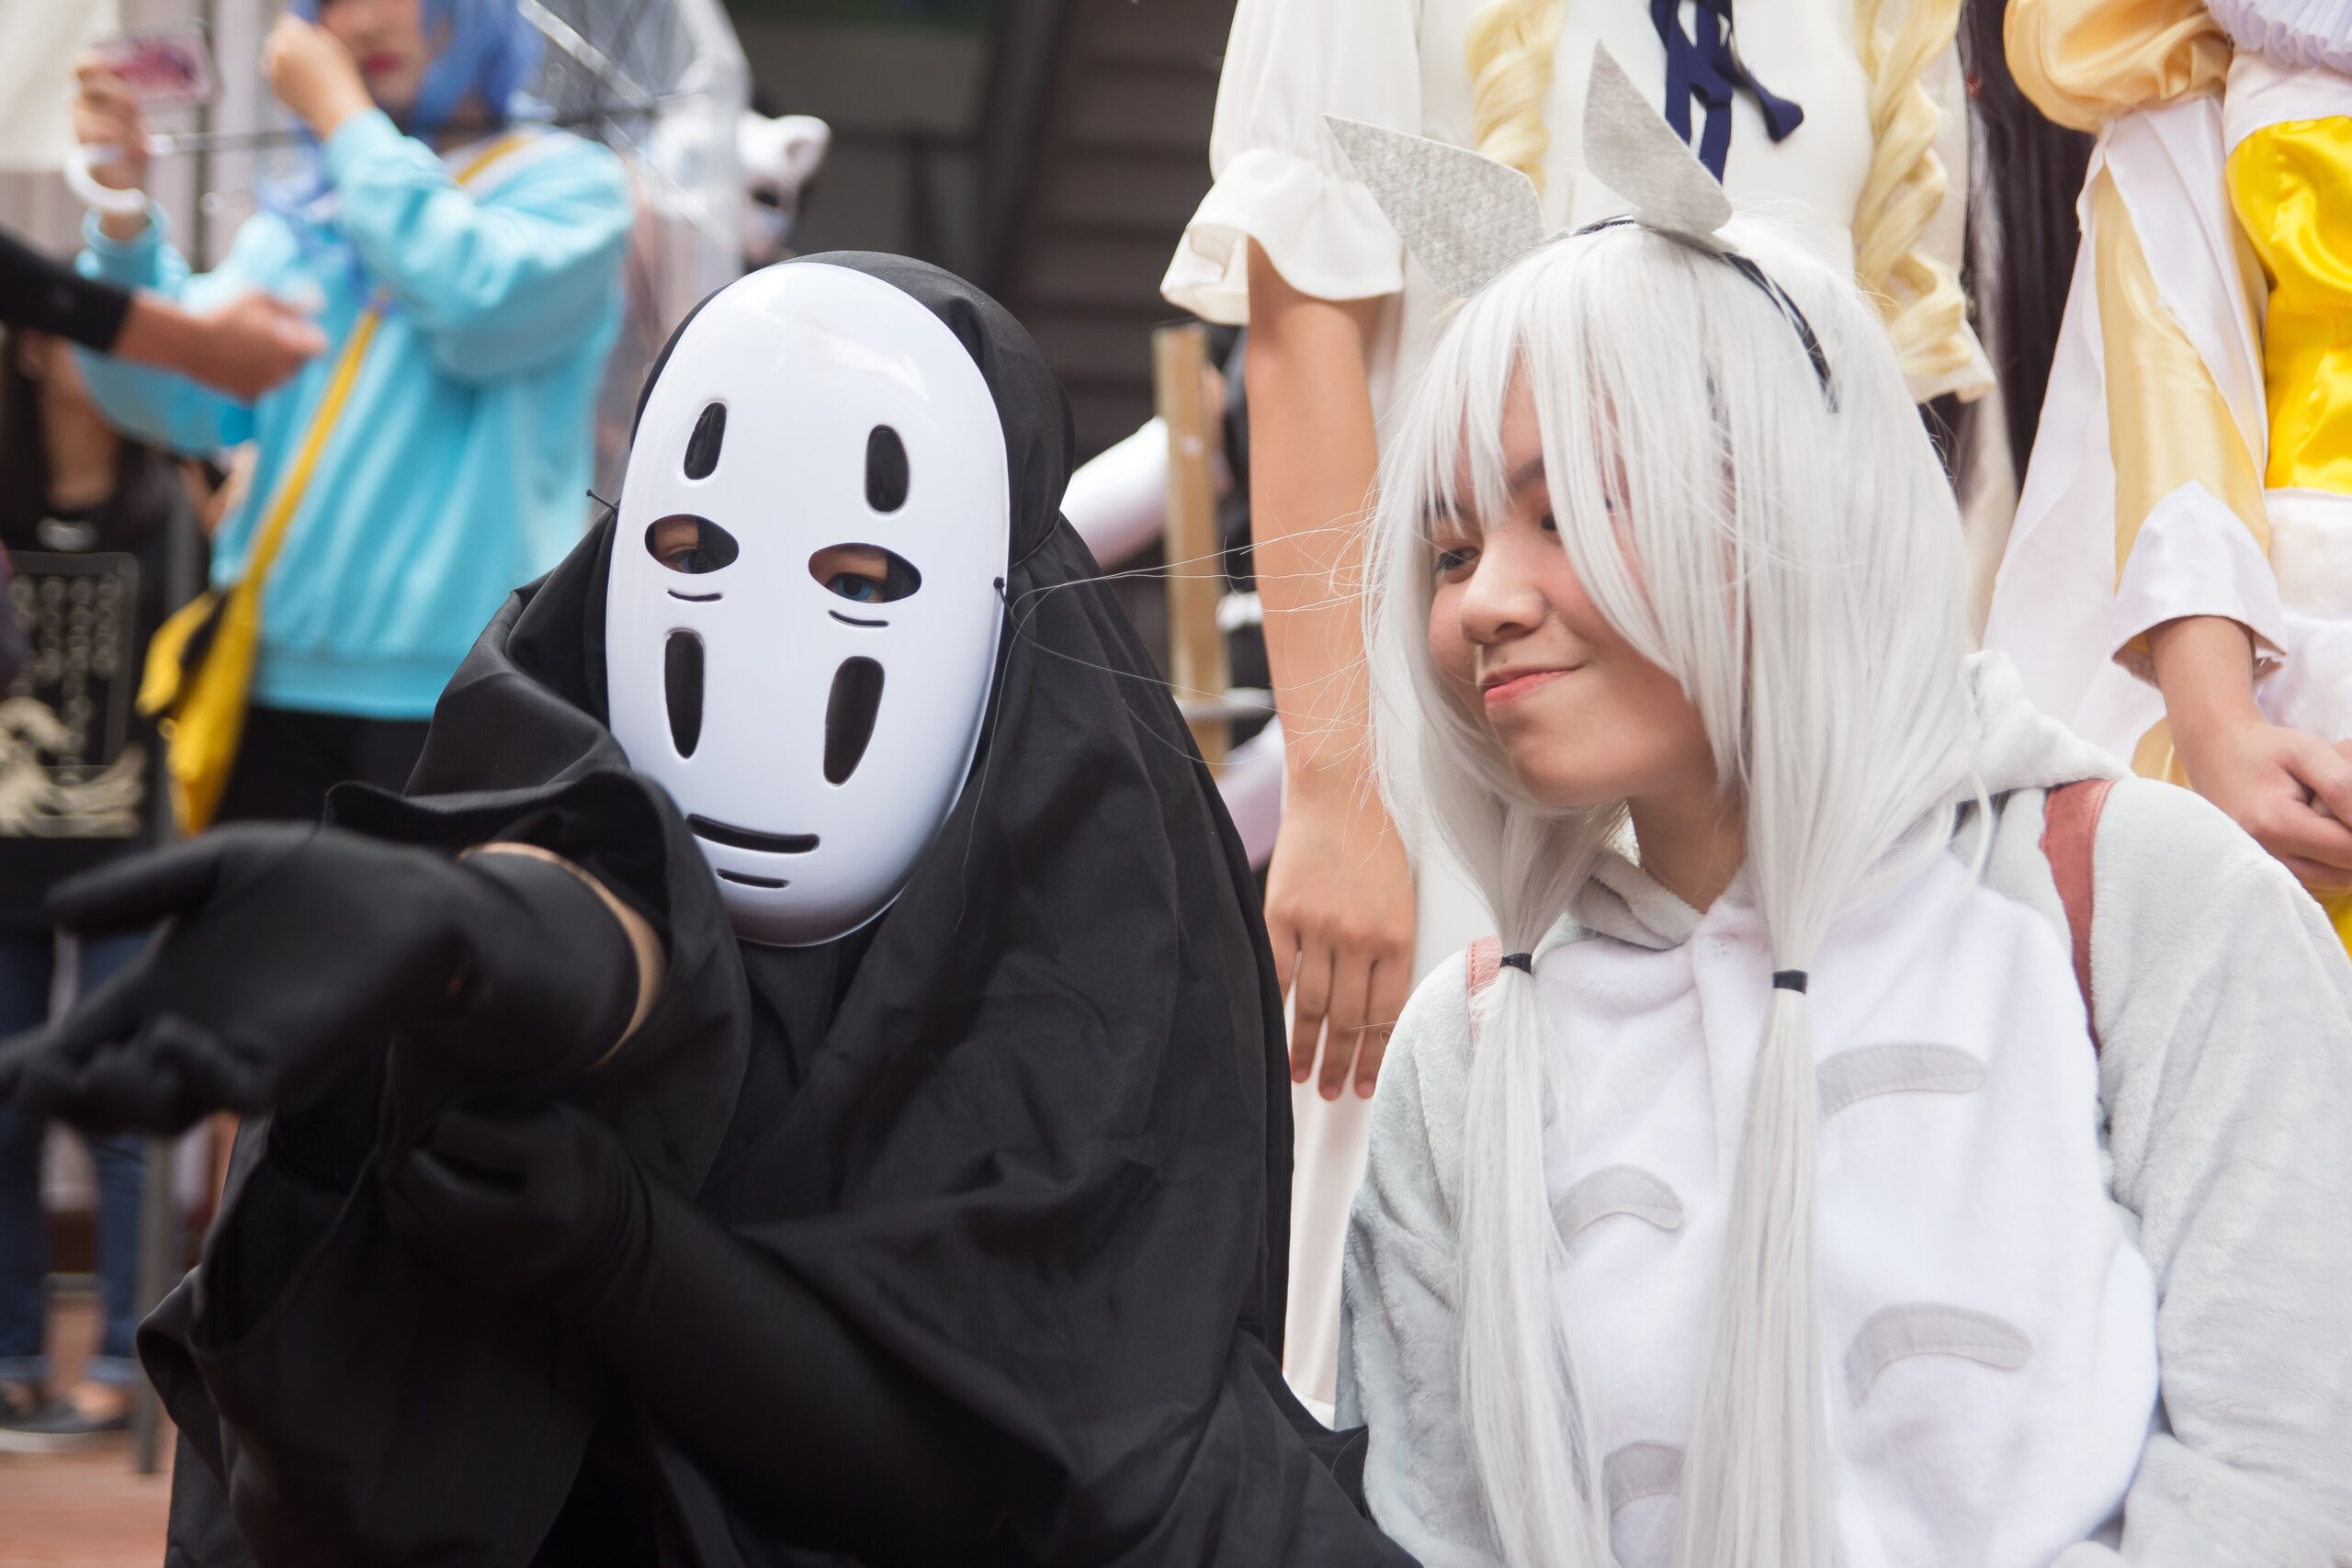 What is cosplay anime? Essential accessories when cosplaying